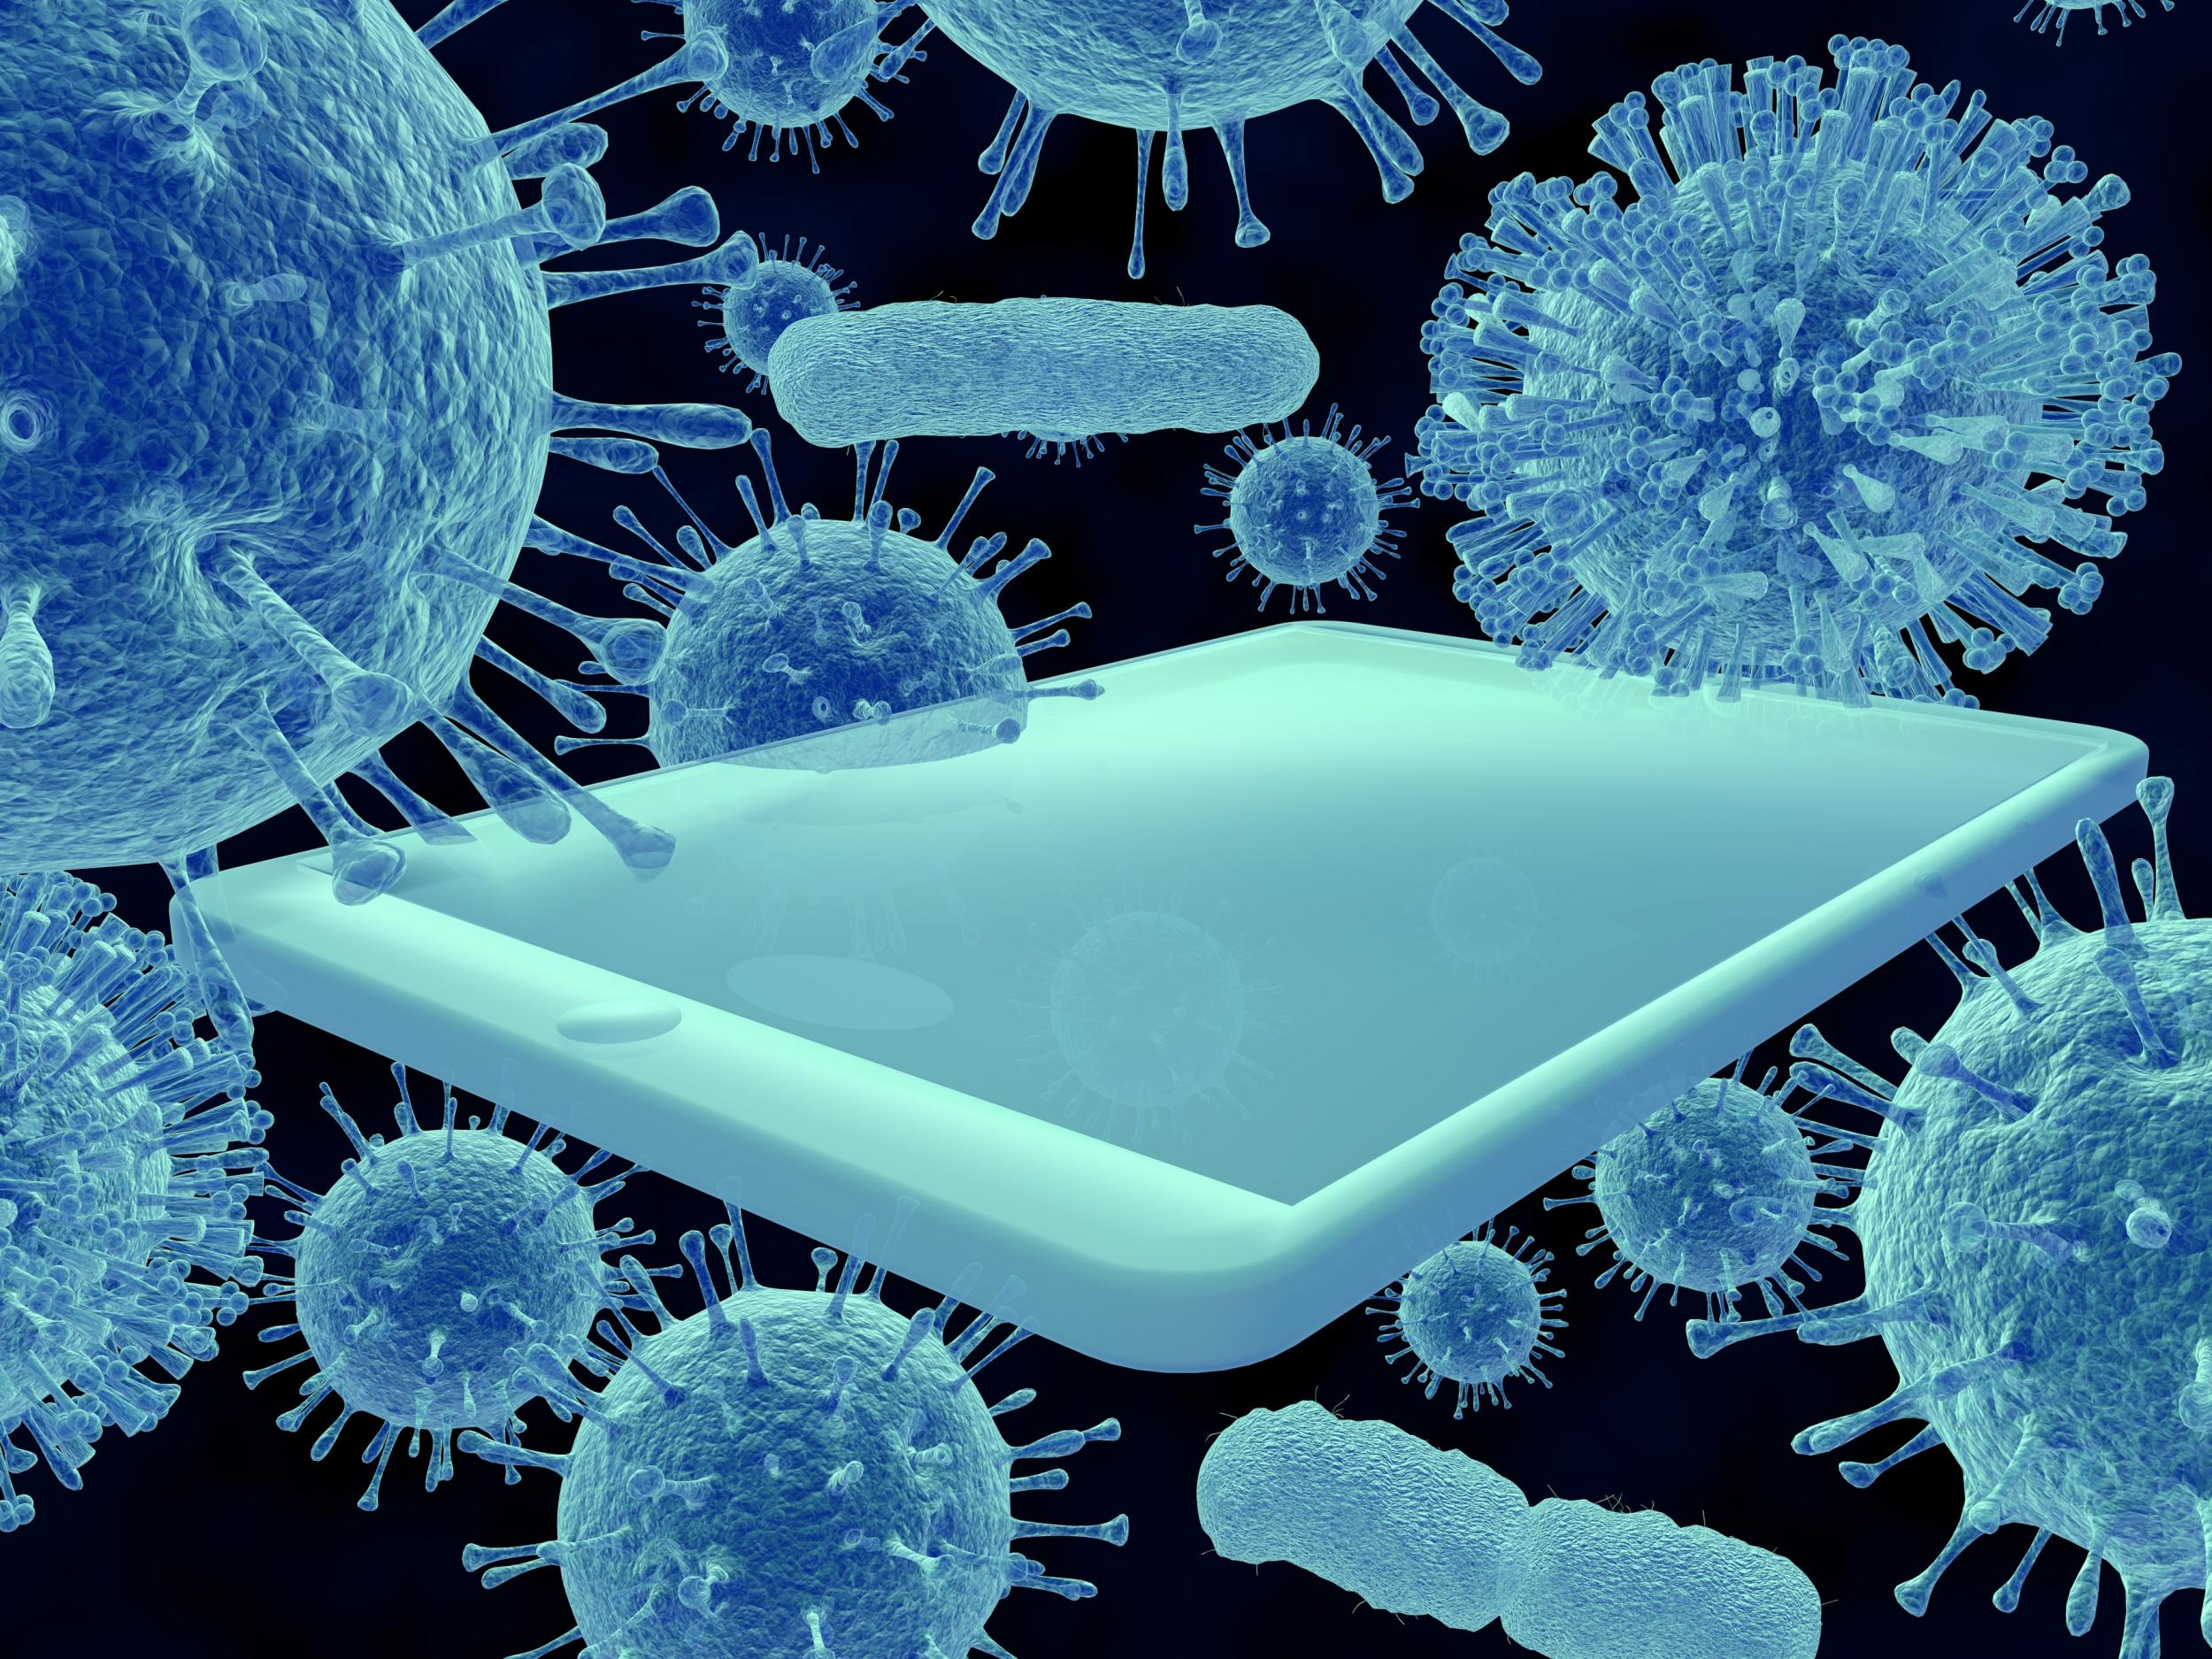 Smartphones, social media and coronavirus isolation is not a great mix